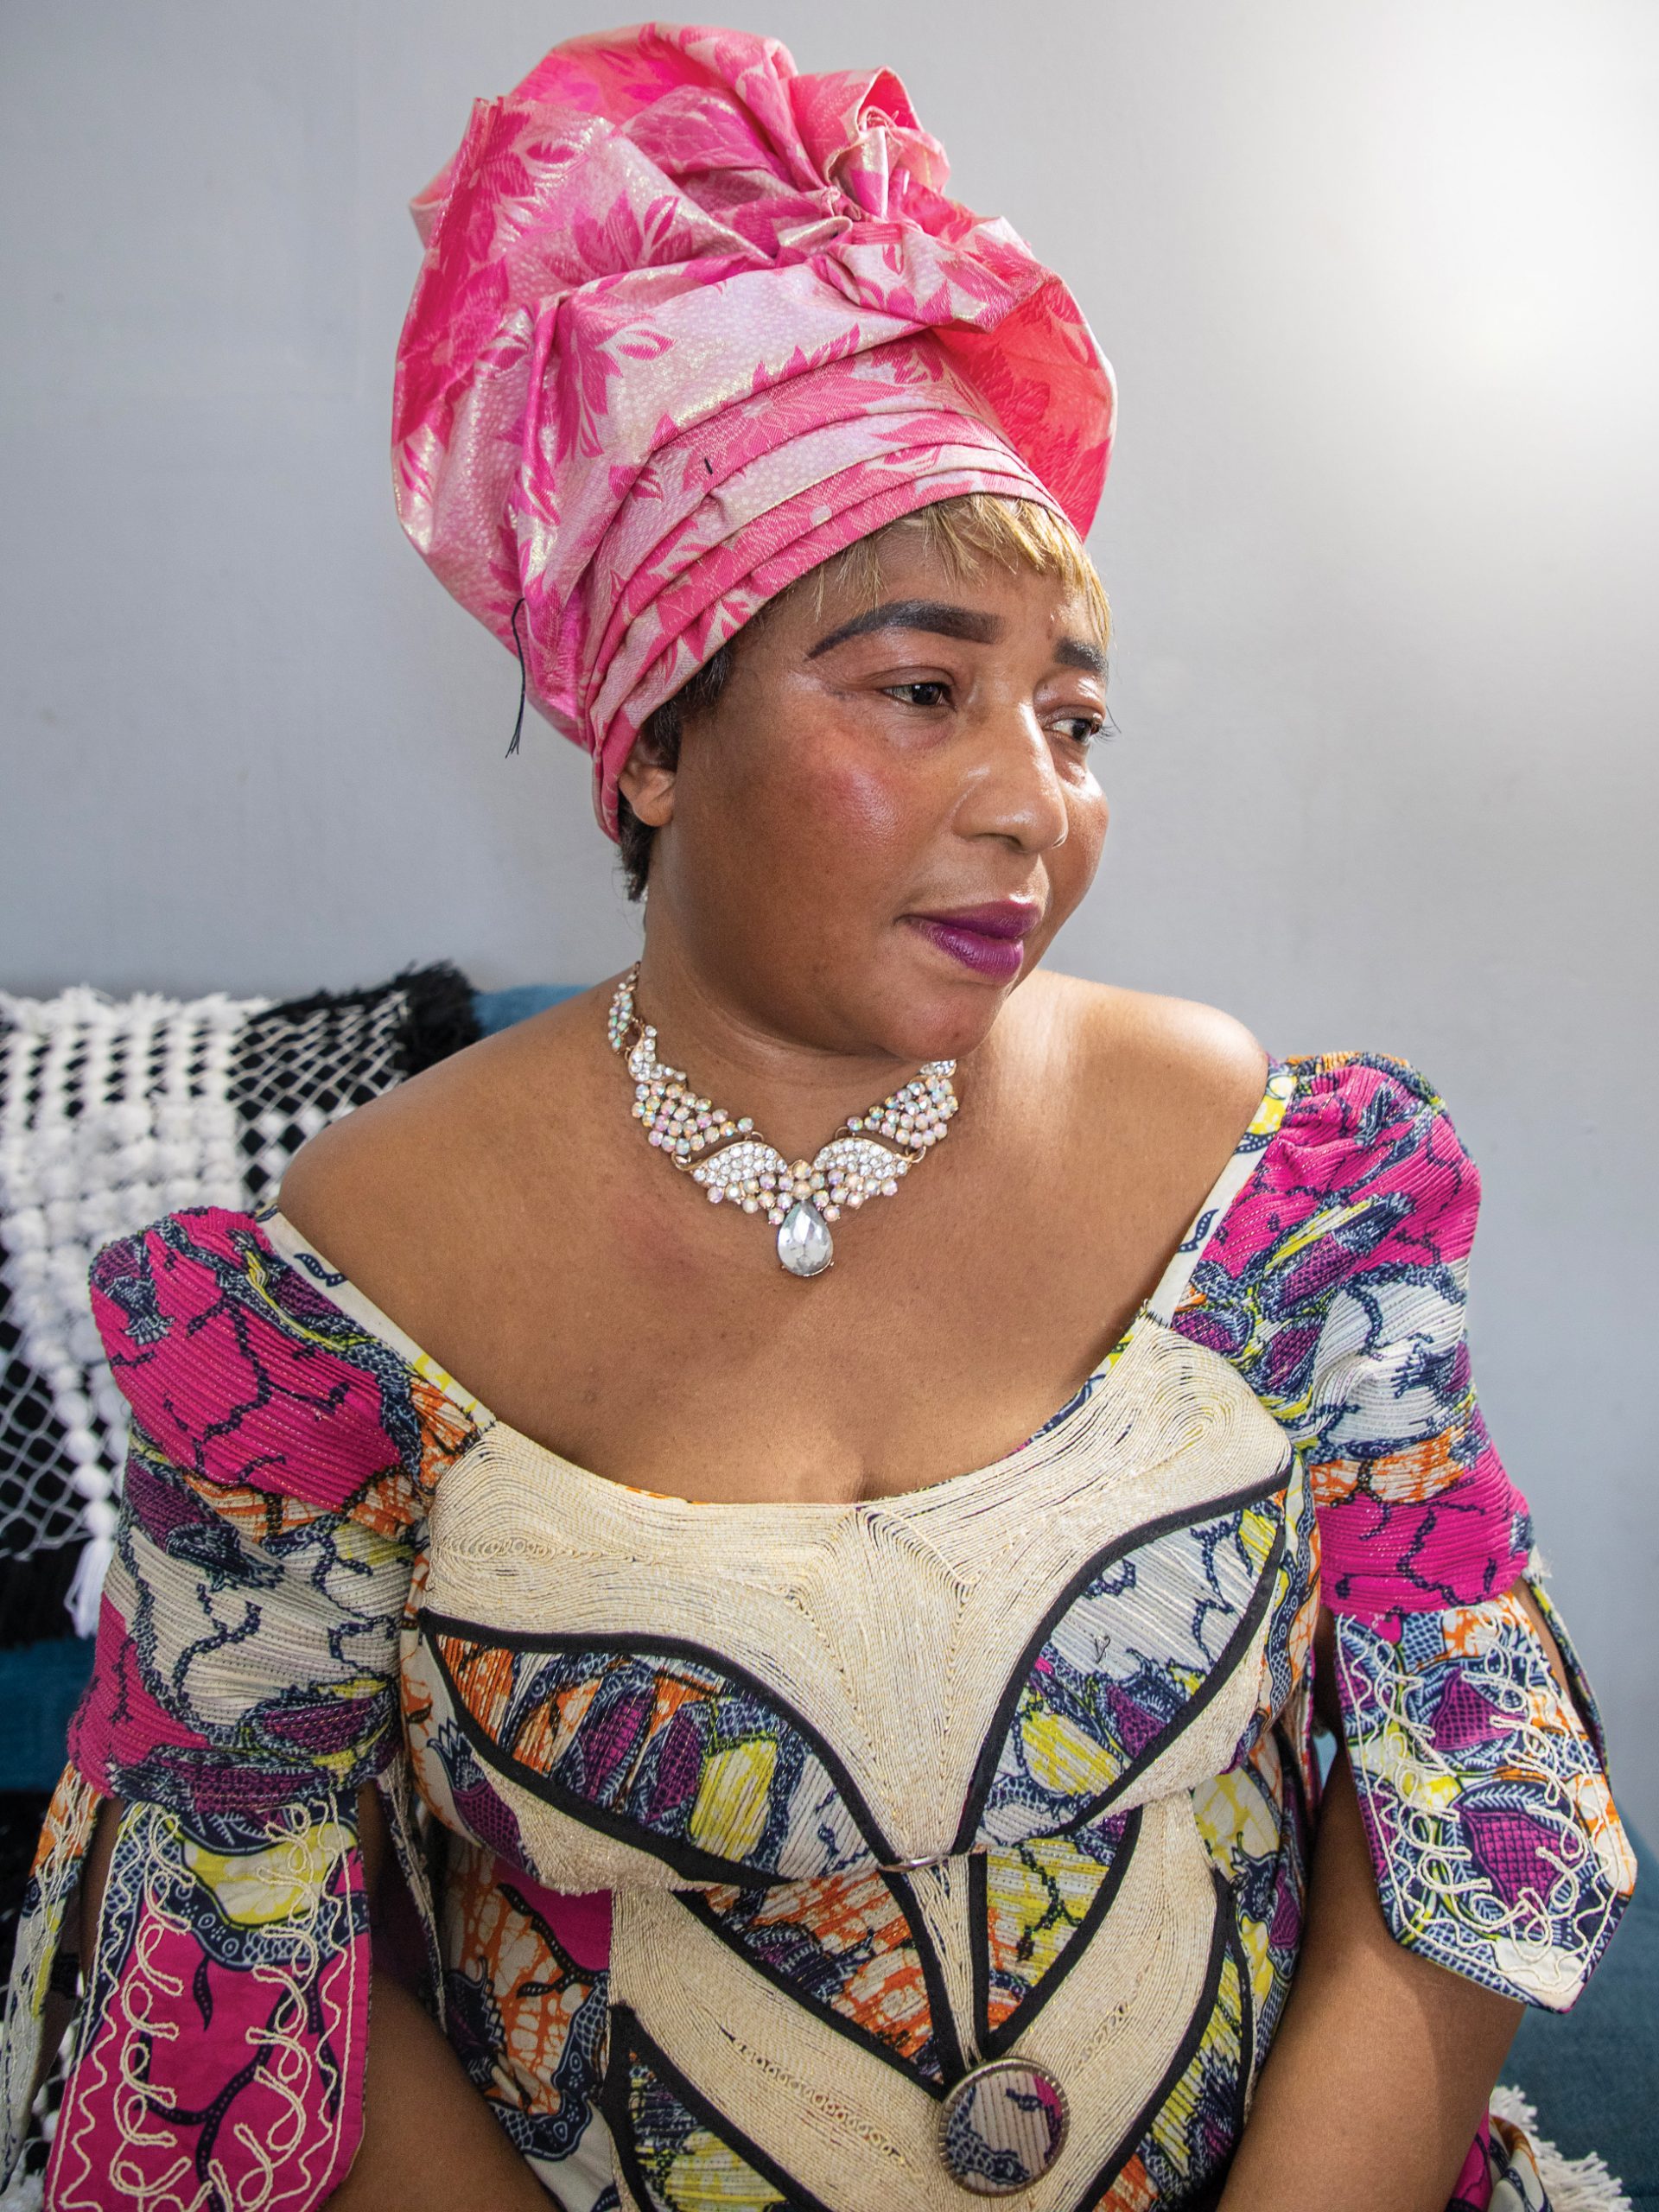 A woman in Congolese clothing.